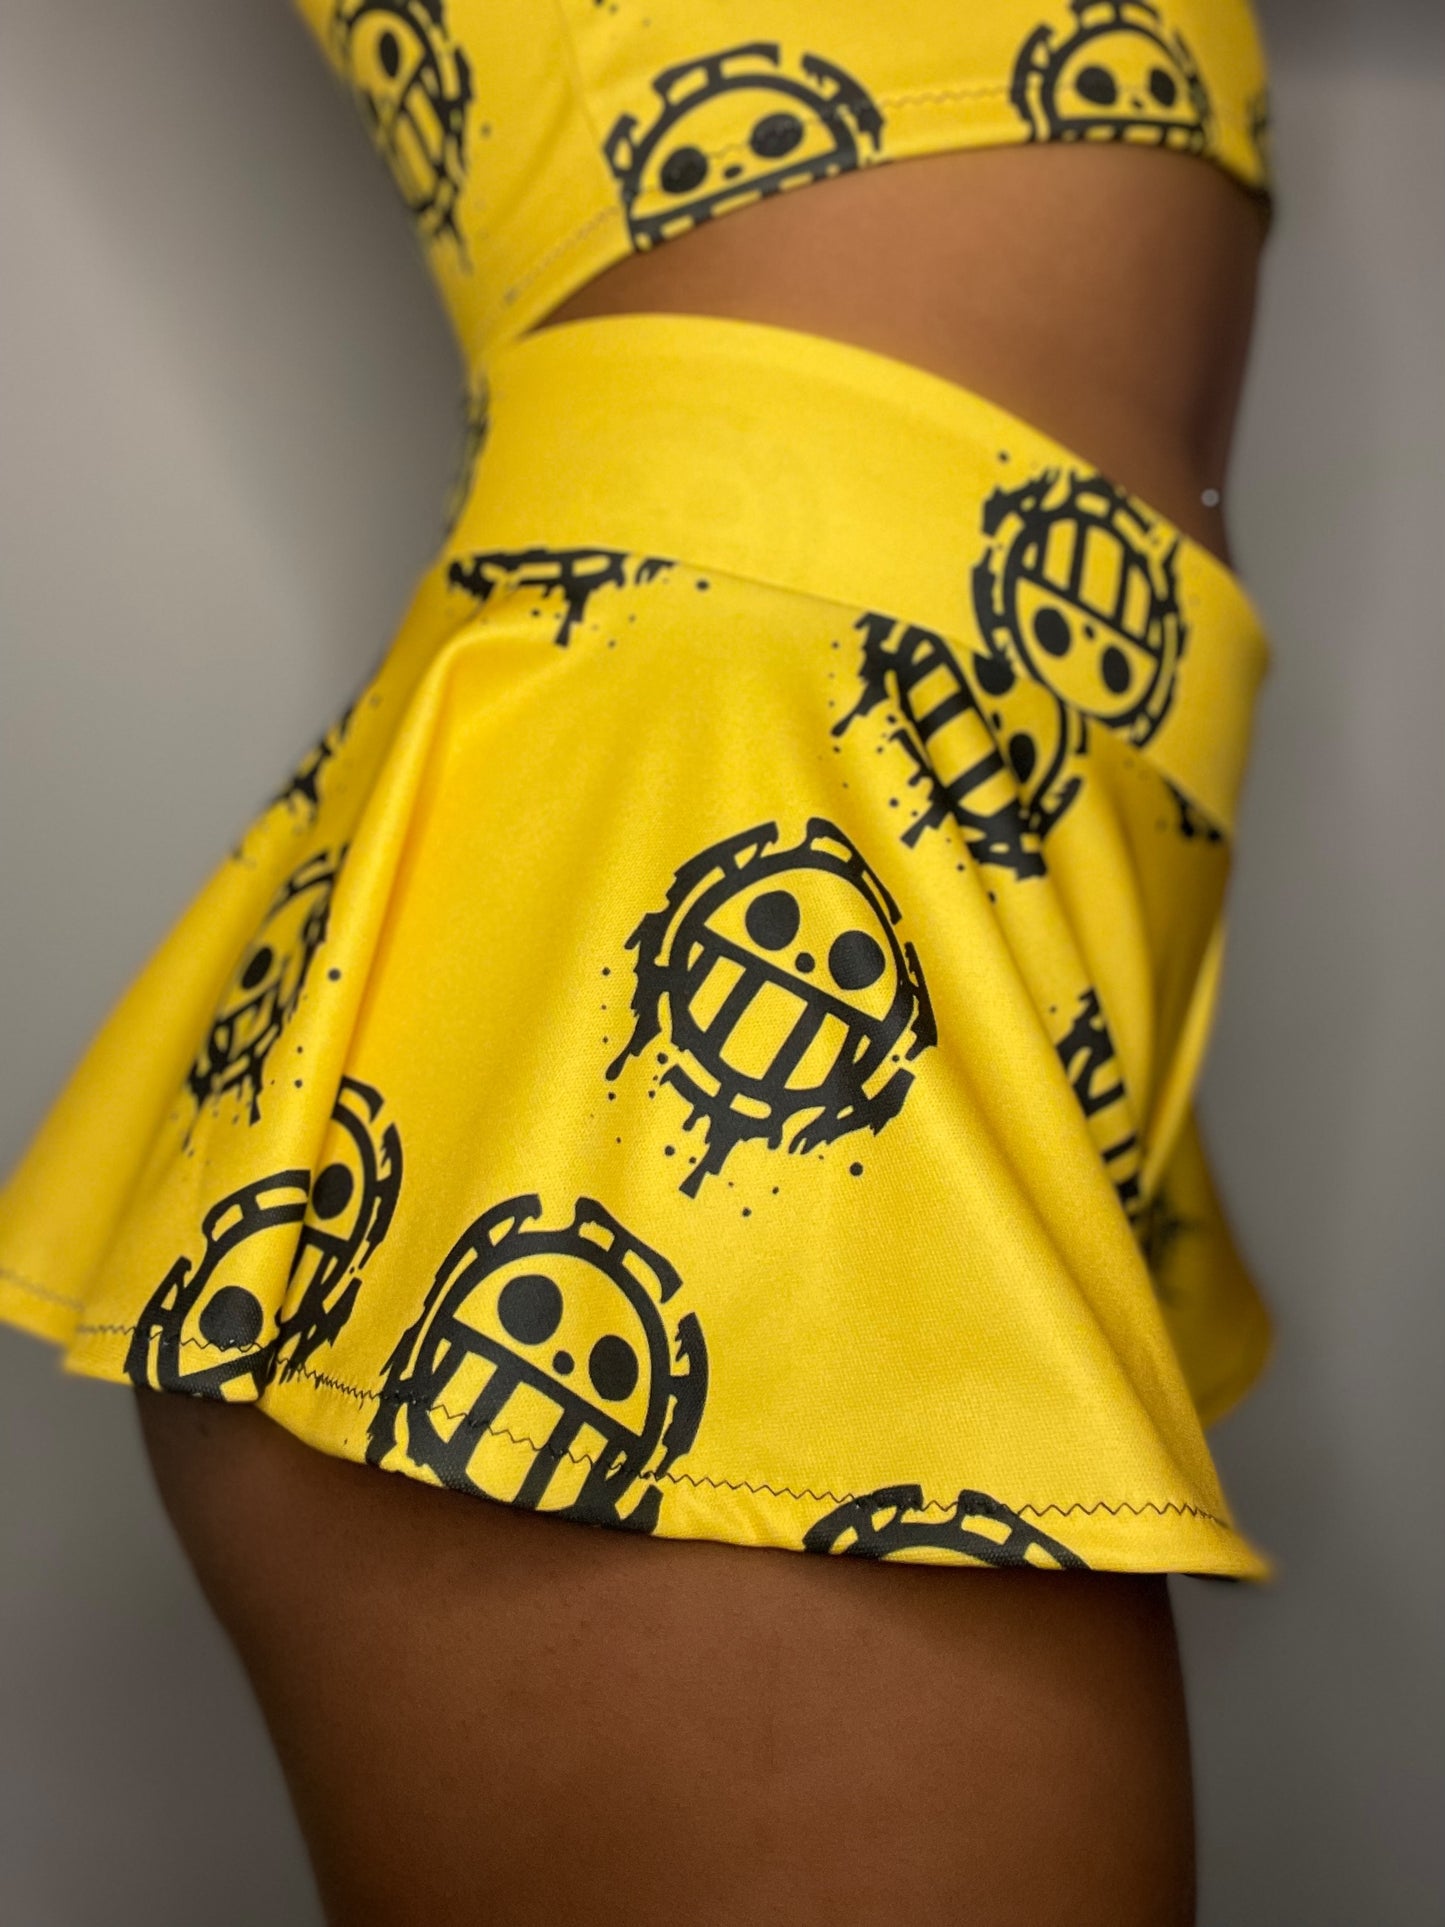 PREORDER “Surgeon of Death” inspired shorties